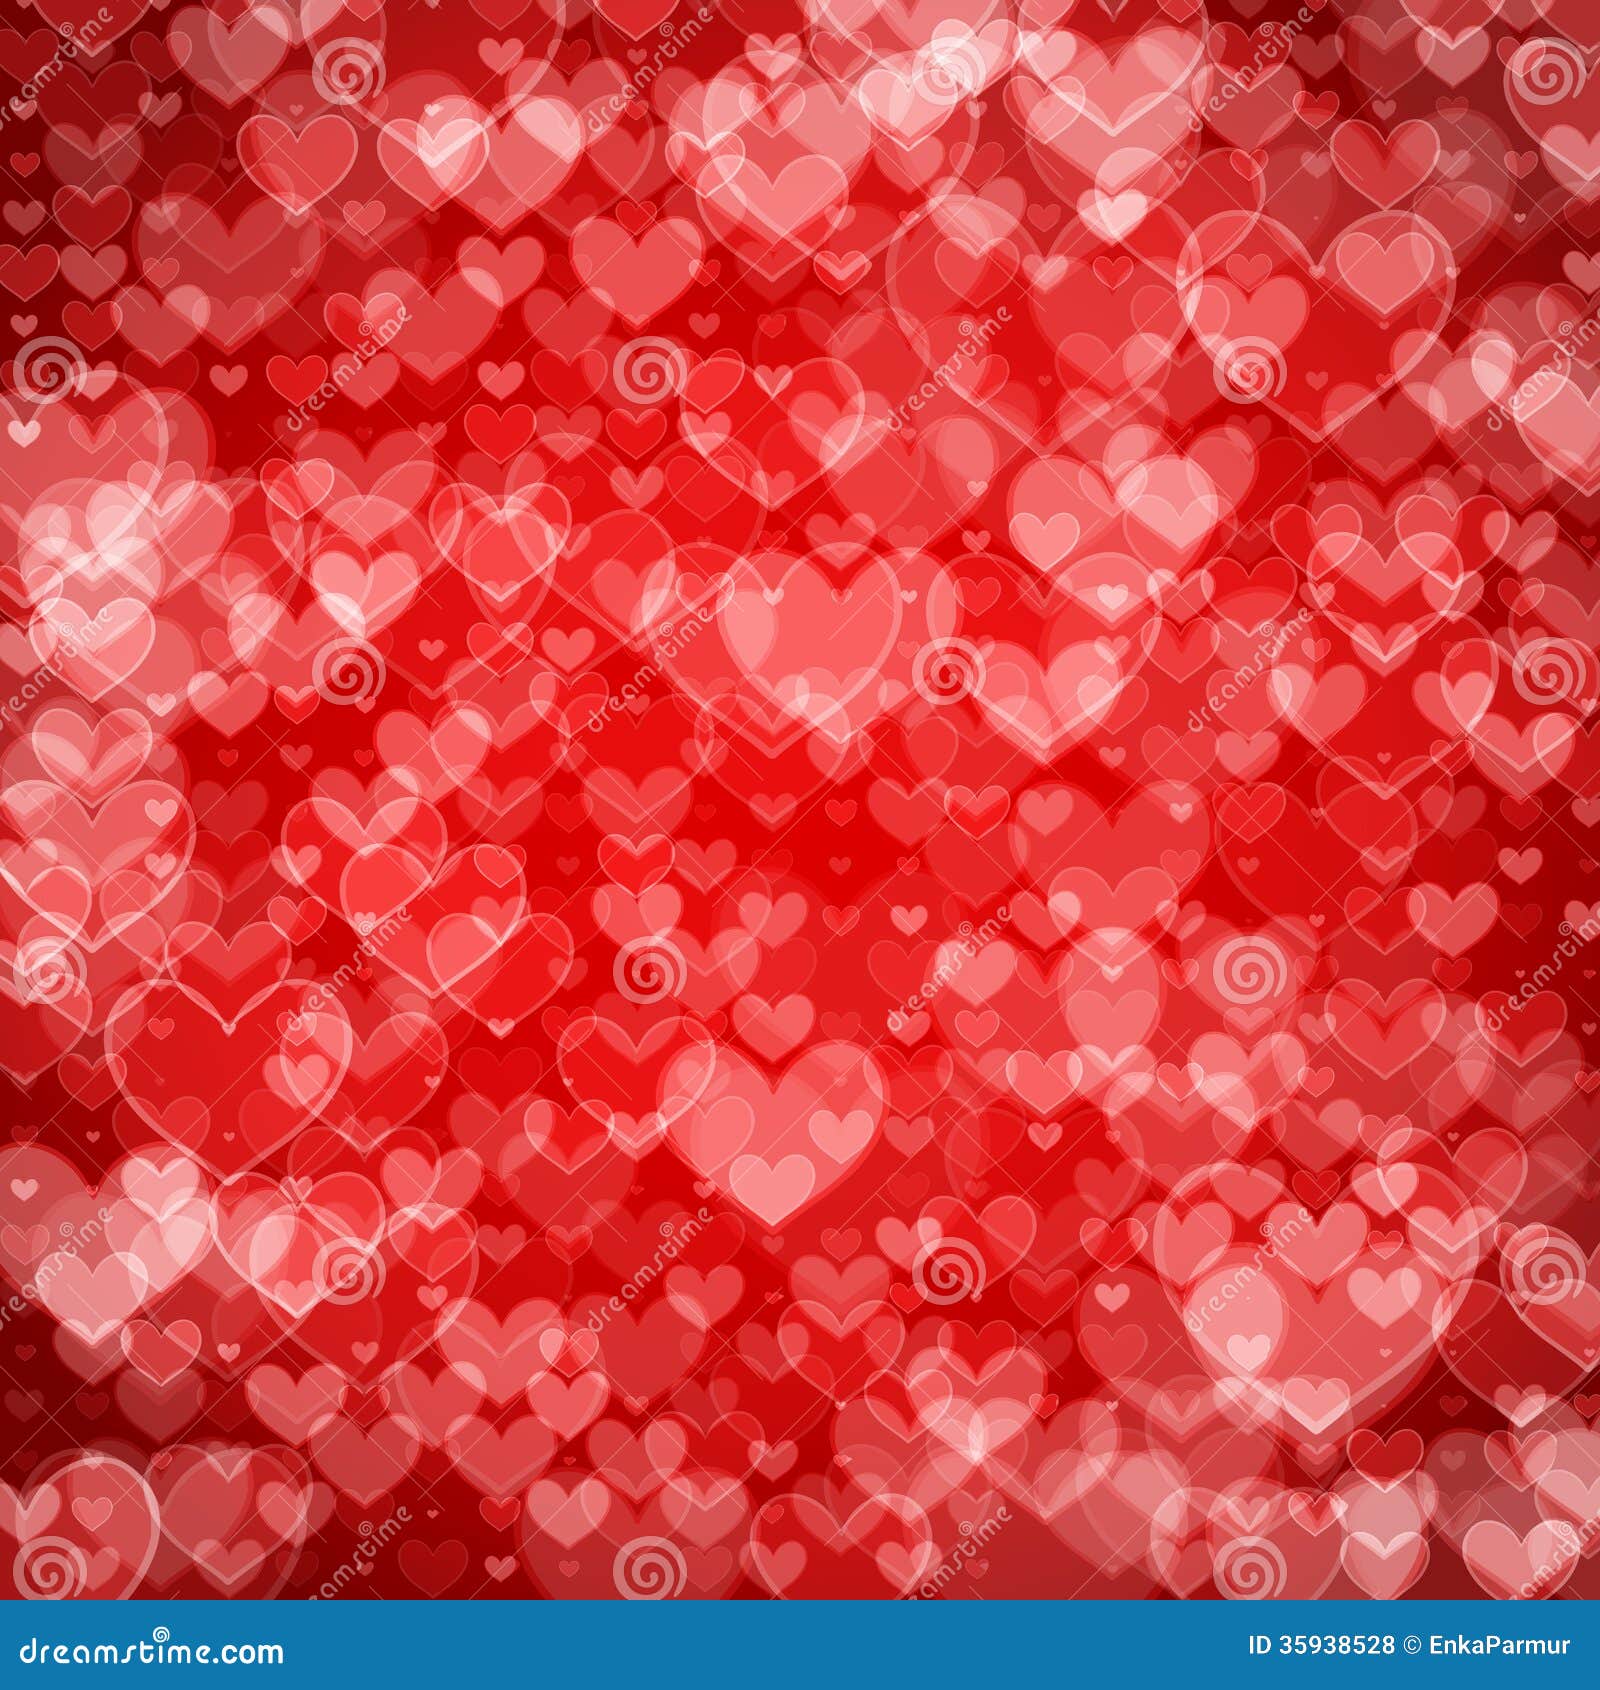 Big Hearts Red Abstract Background Stock Vector - Illustration of color ...